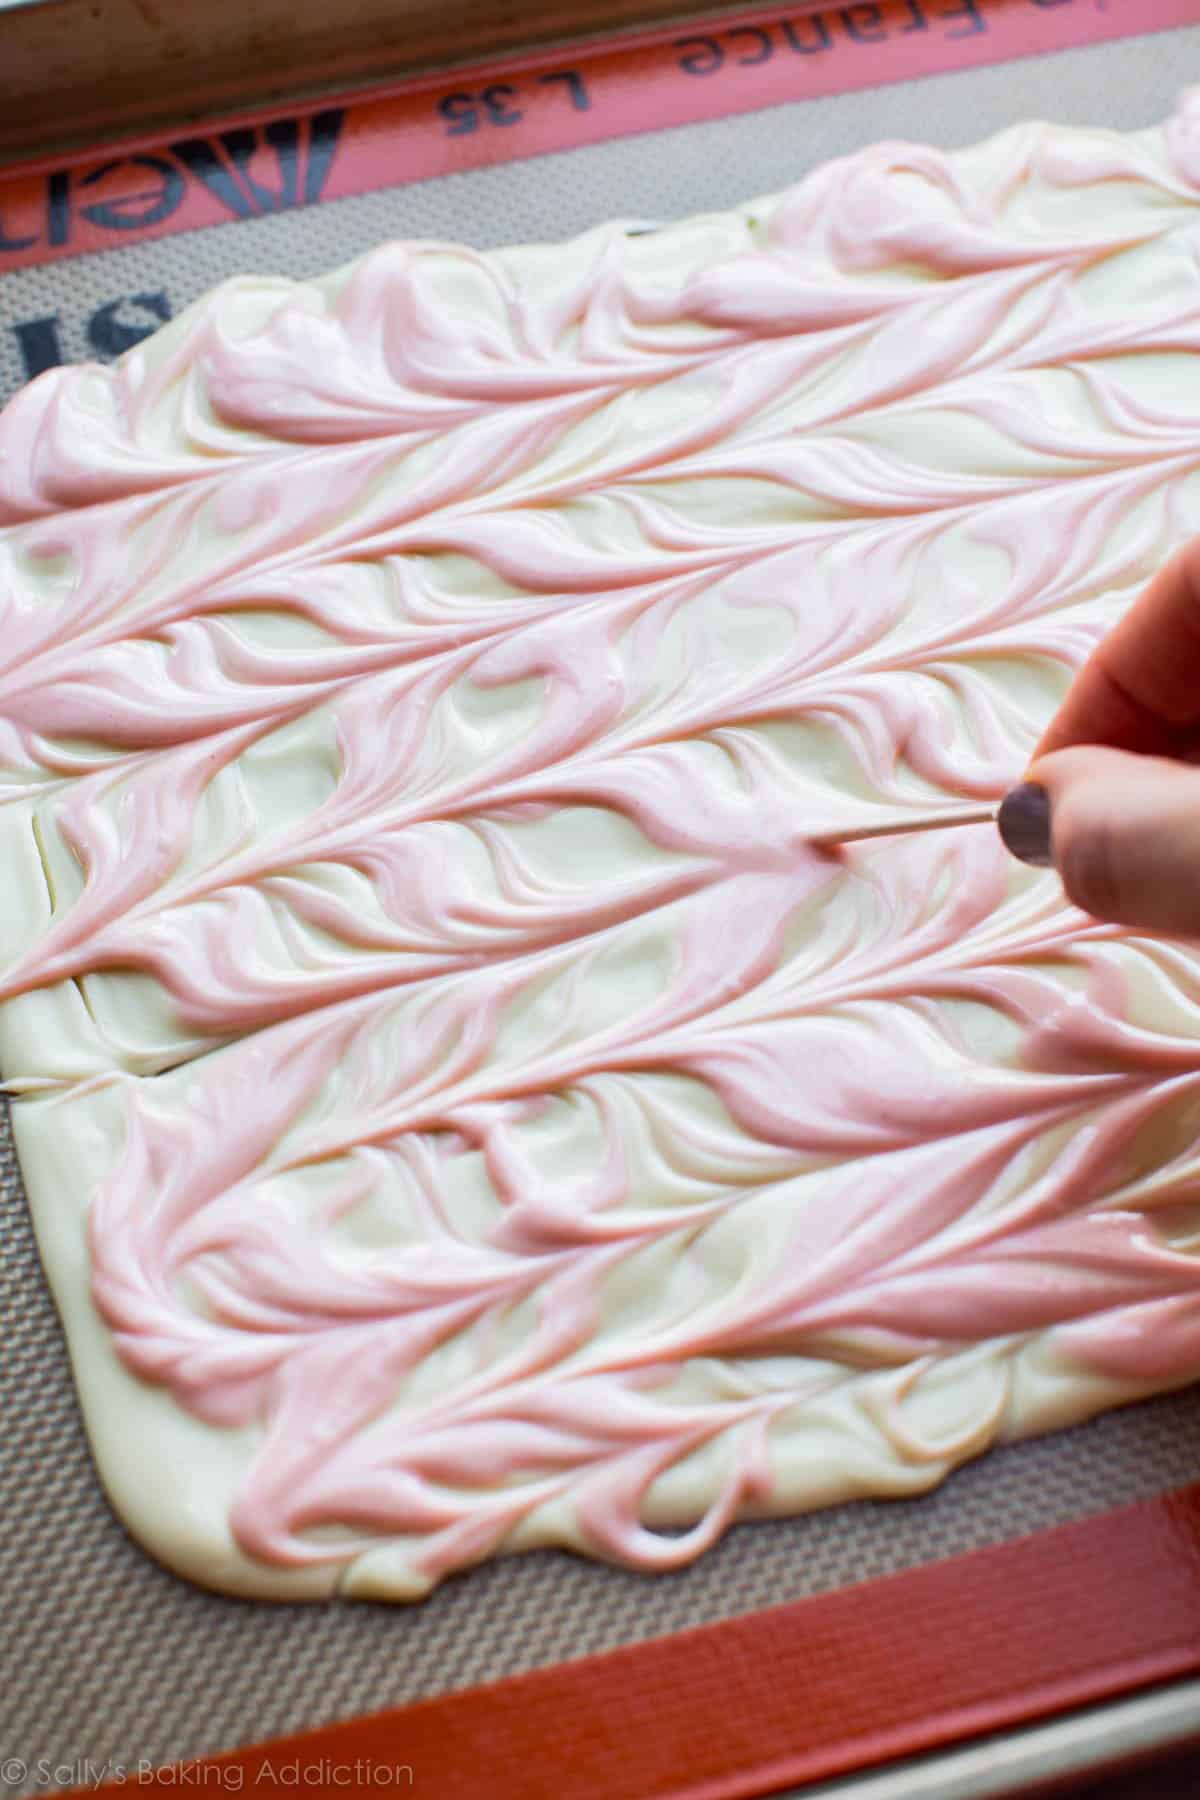 swirling white chocolate and pink colored white chocolate with a toothpick on a silpat baking mat